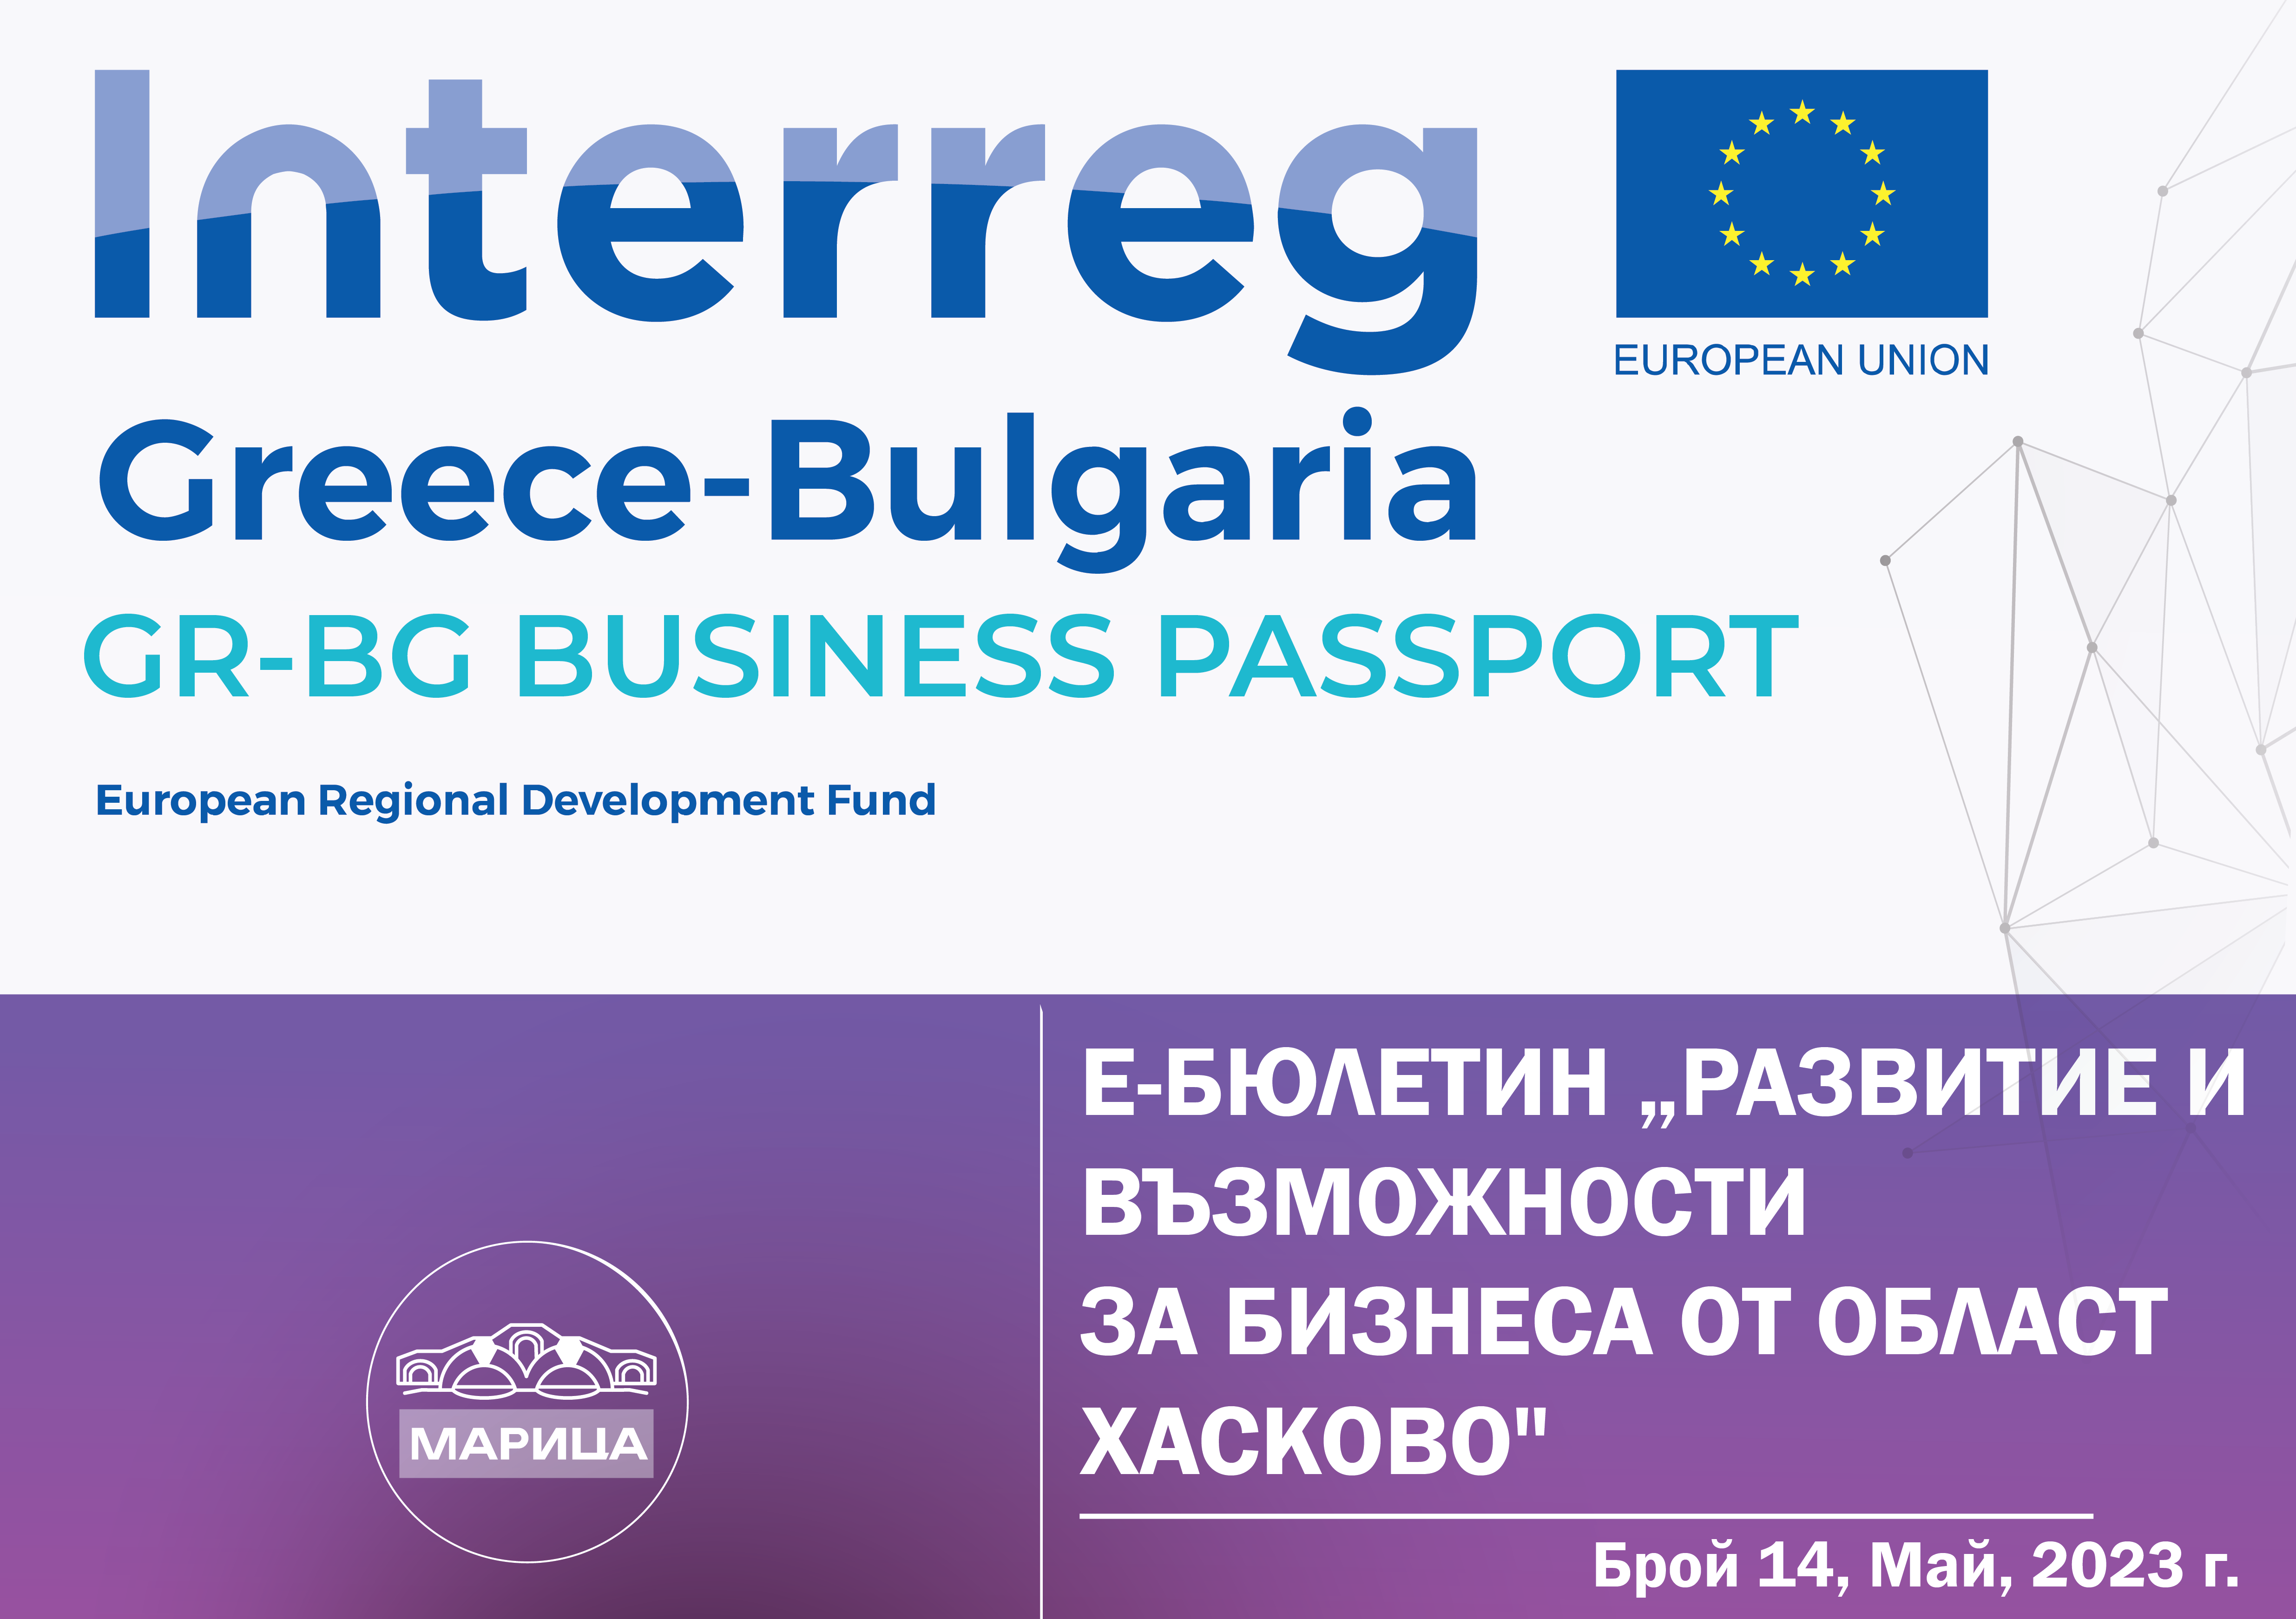 e-newsletter “Development and opportunities for business in the Haskovo region” under a project with the acronym “GR-BG BUSINESS PASSPORT, Маrch, 2023, 14th edition